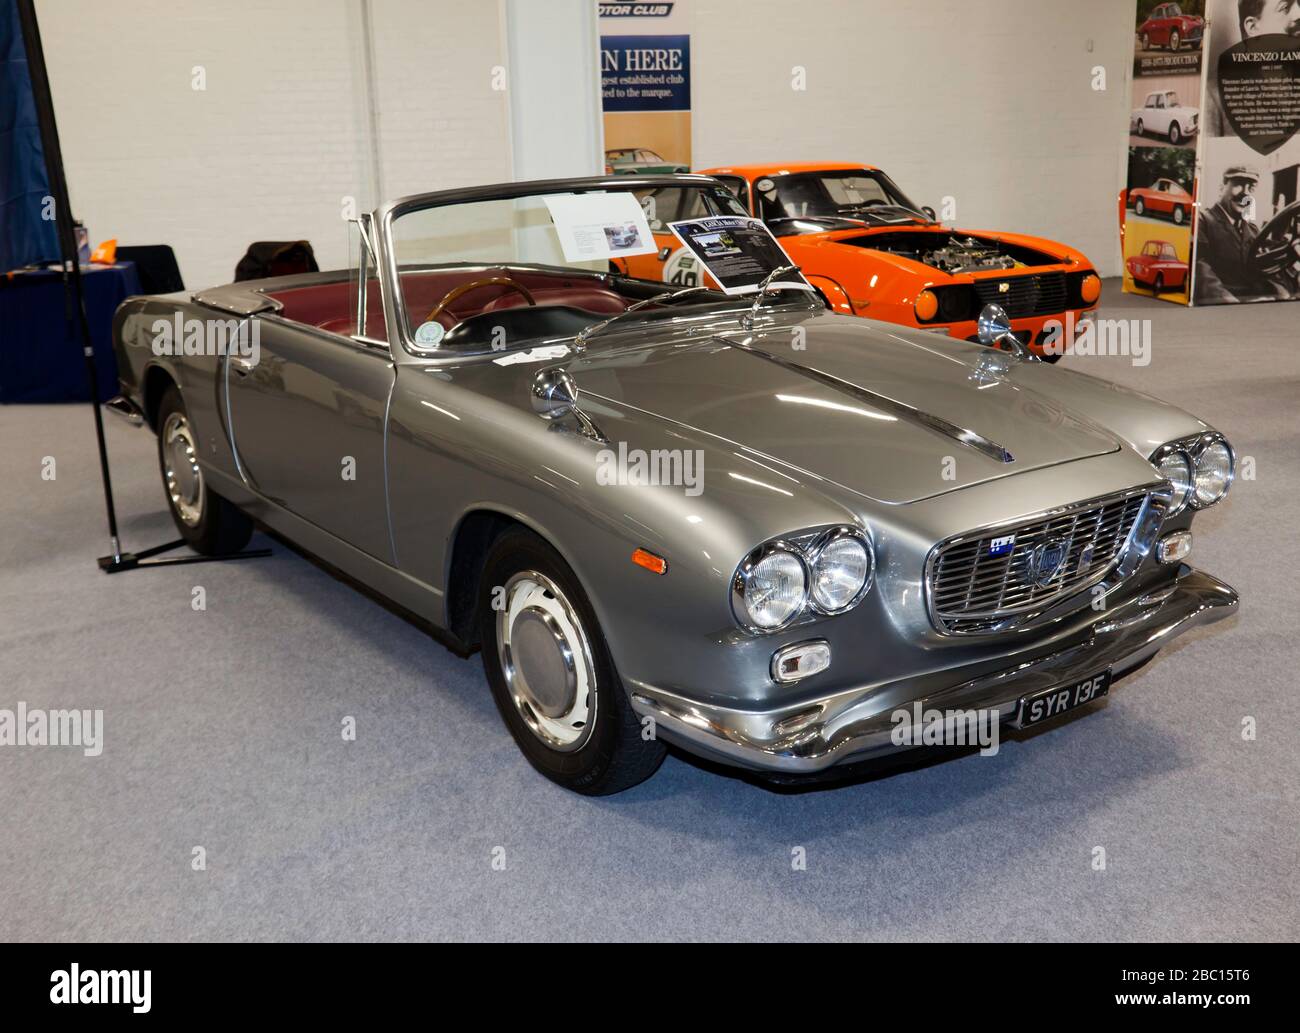 Three-quarter Front view of a 1967, Lancia Flavia Vignale Iniezione, on display at the 2020 London Classic Car Show Stock Photo